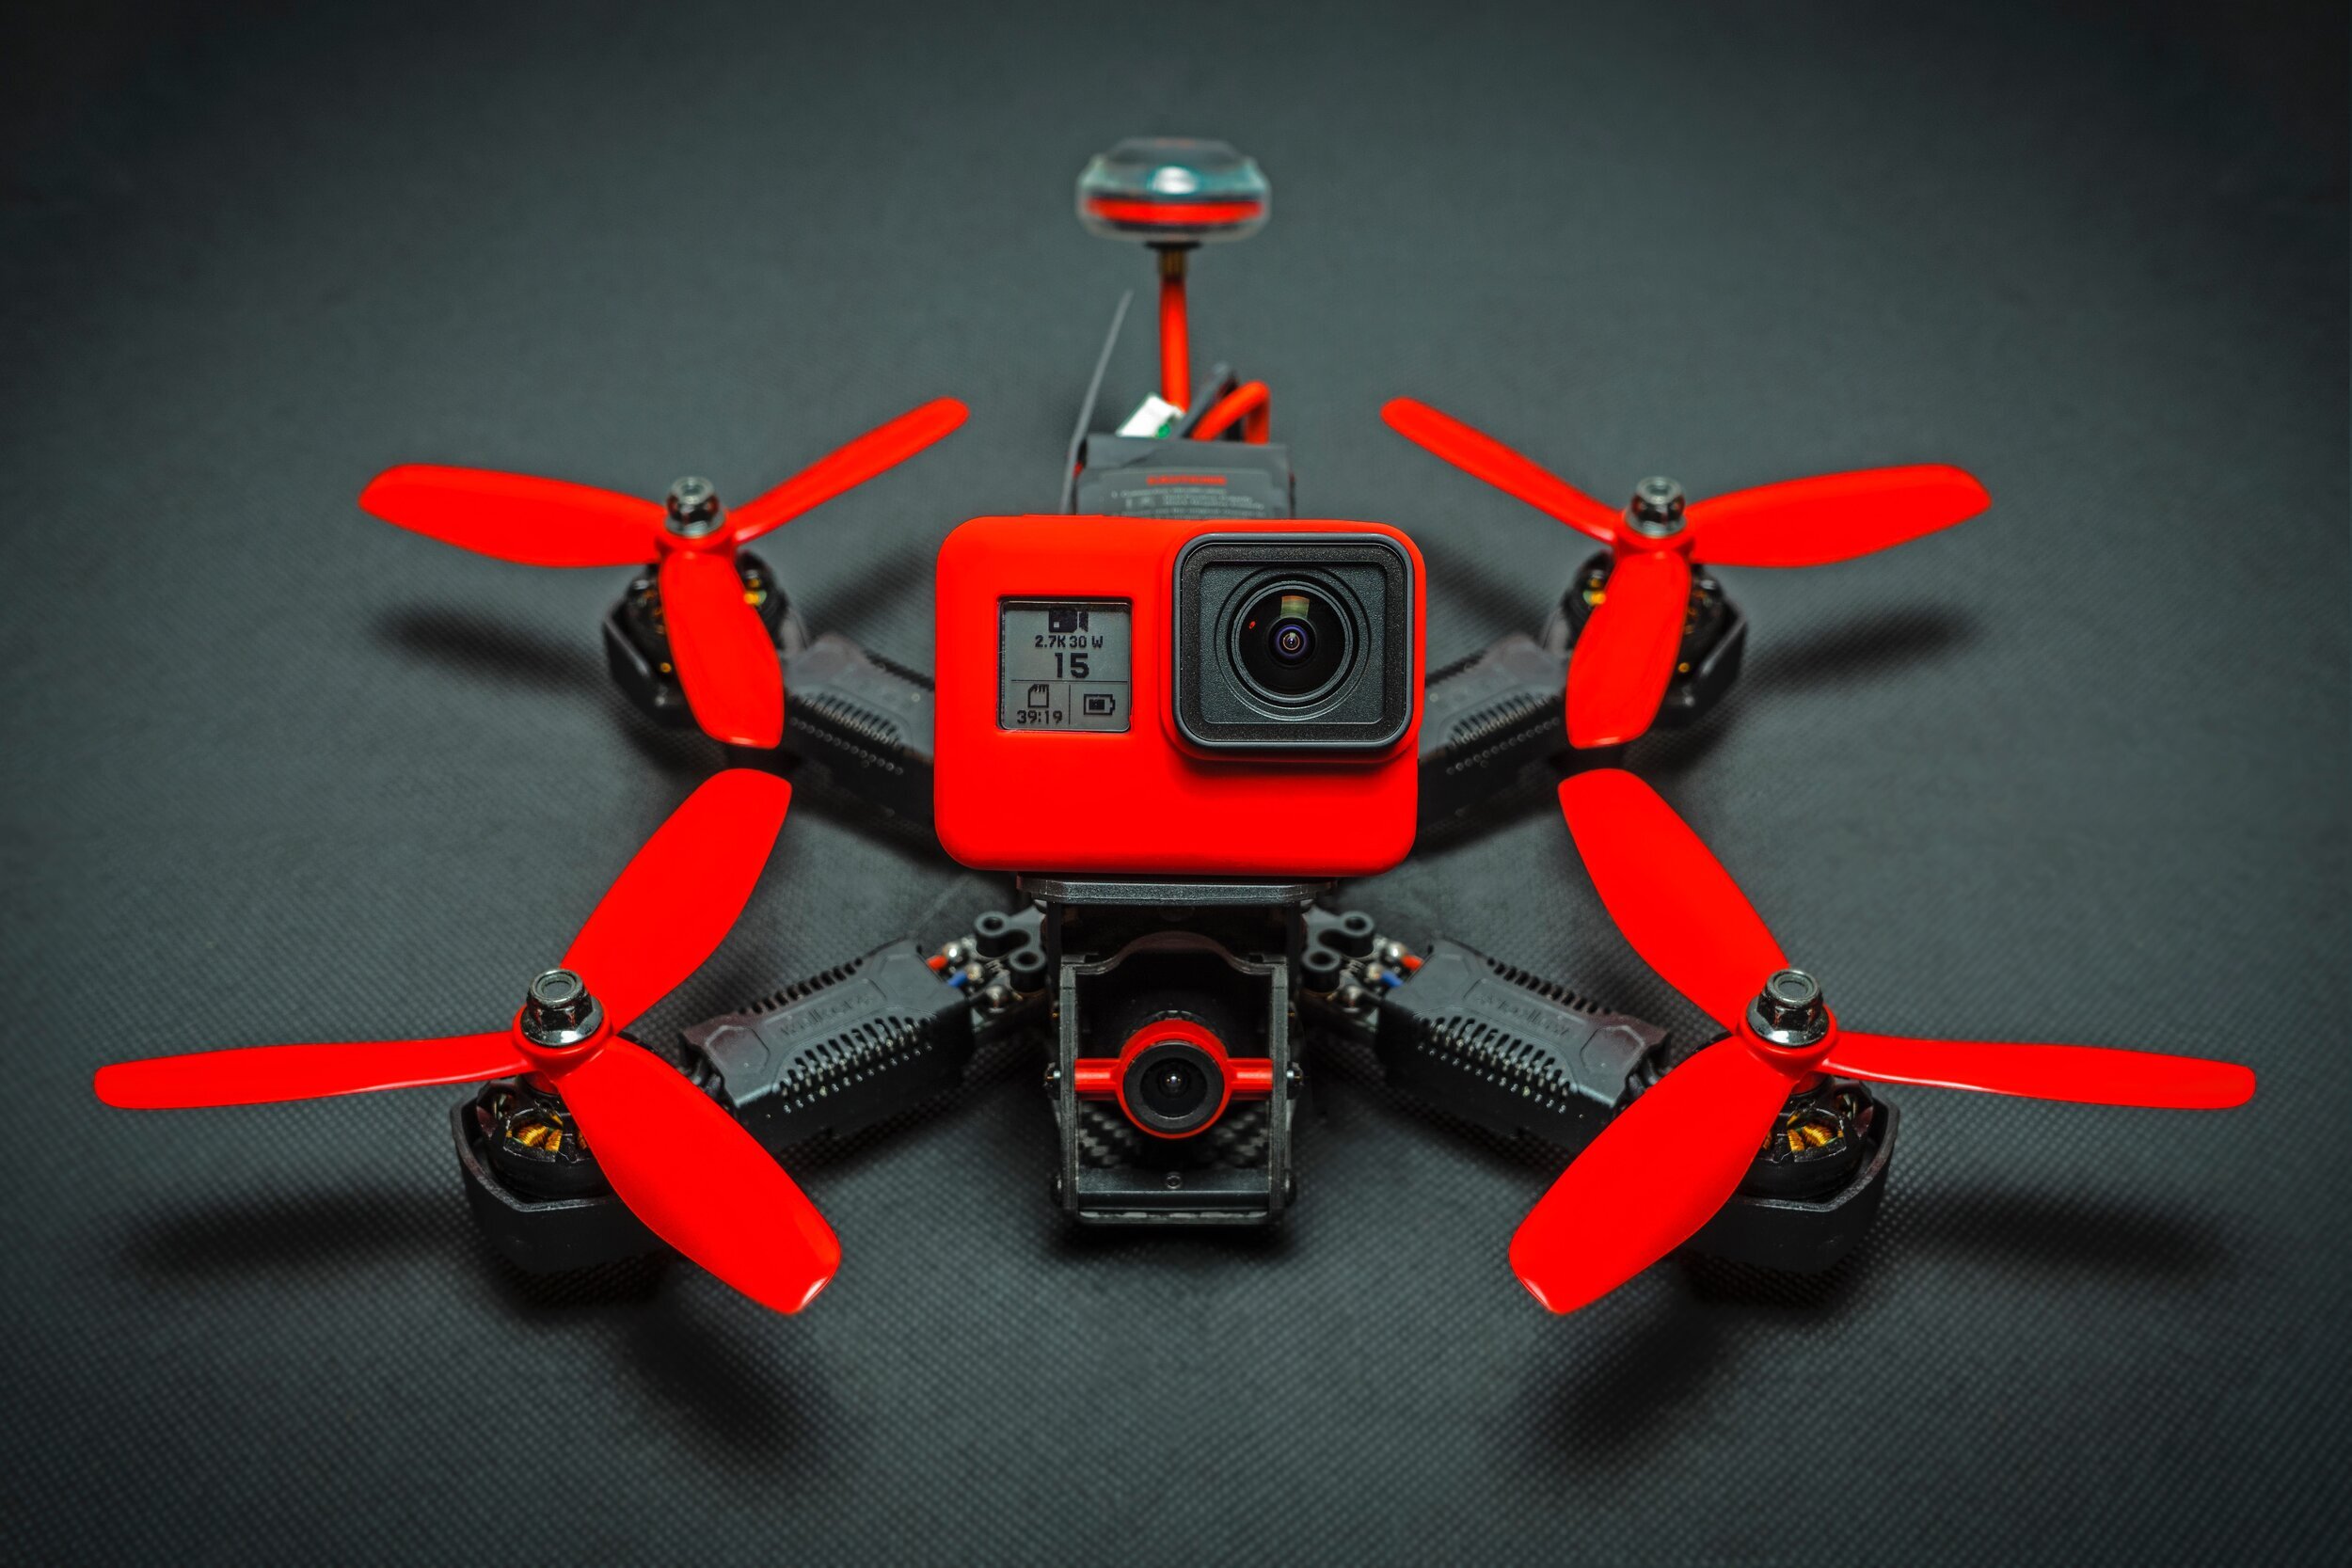 What are the parts of a Dron? Full list